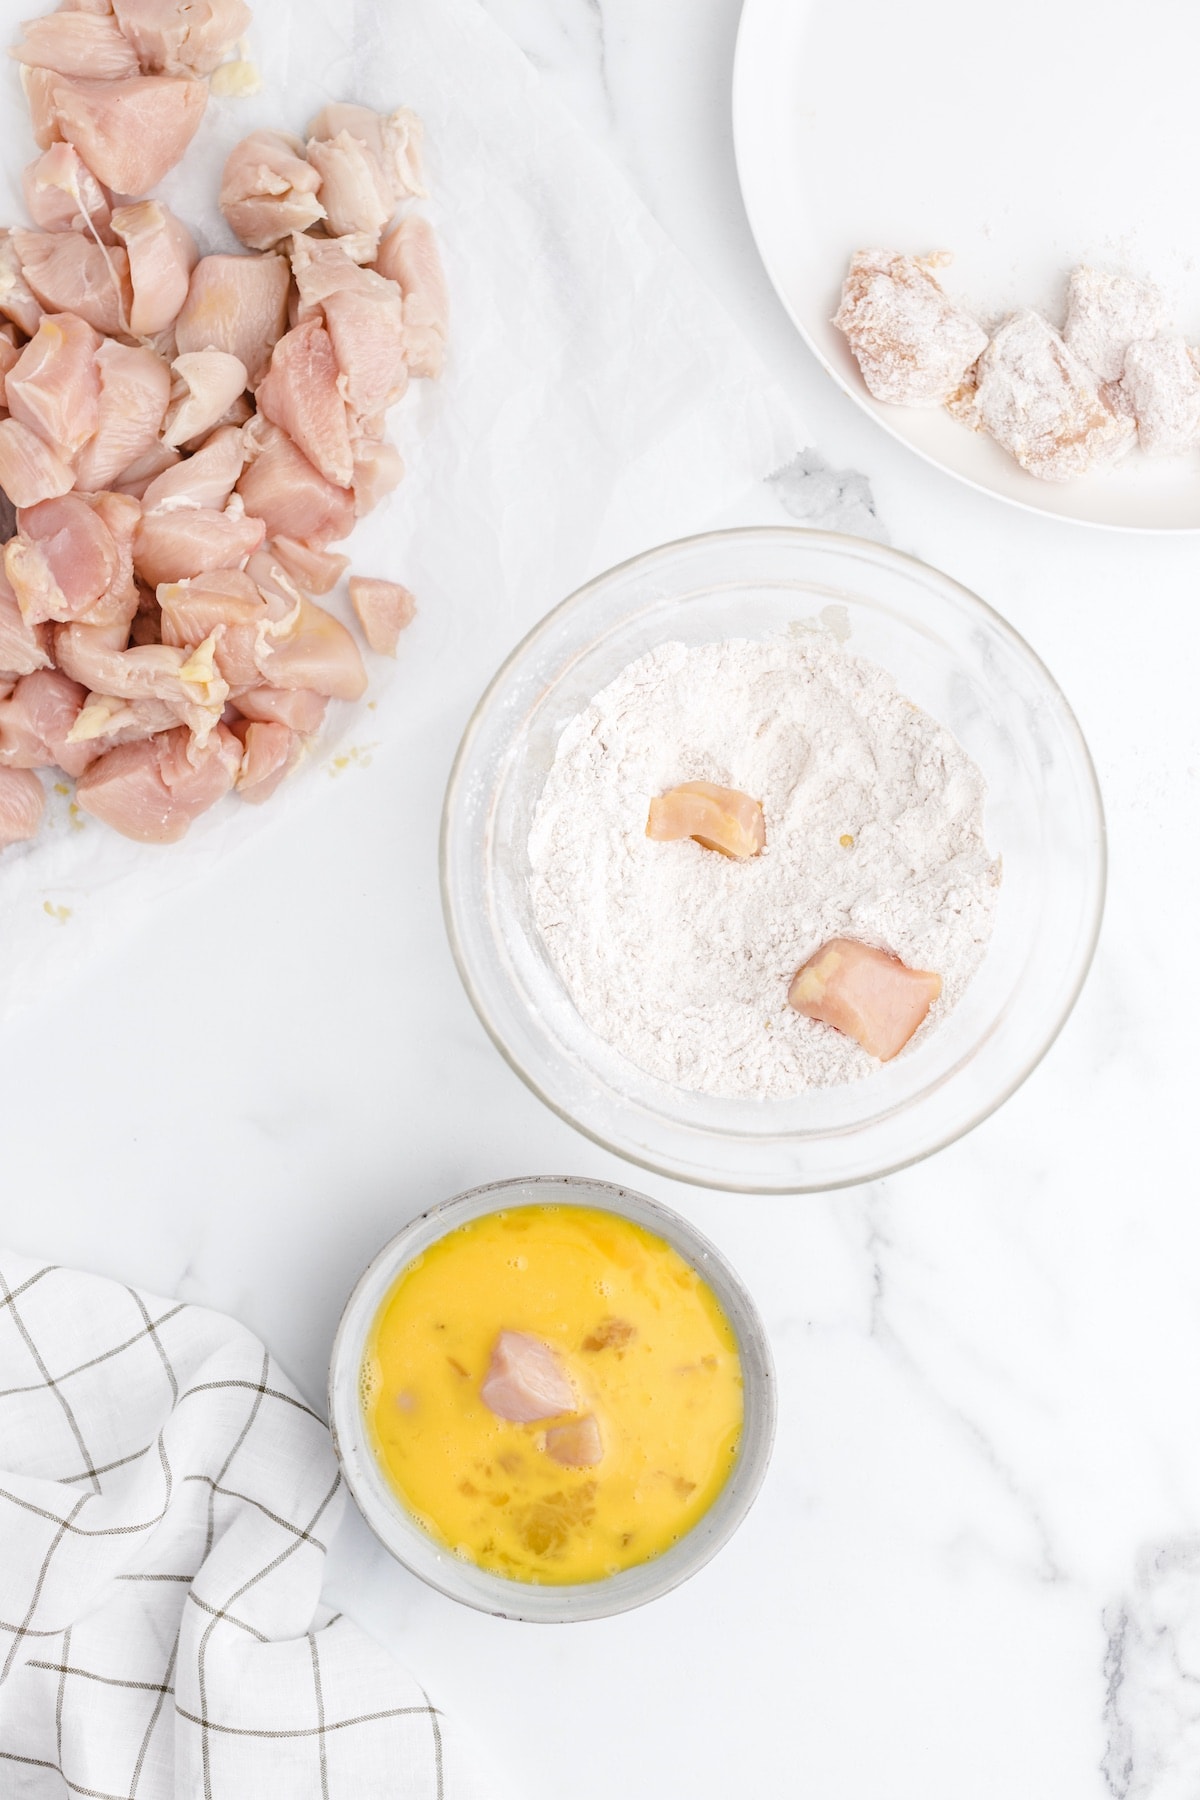 dip the chicken in the egg and coat with flour